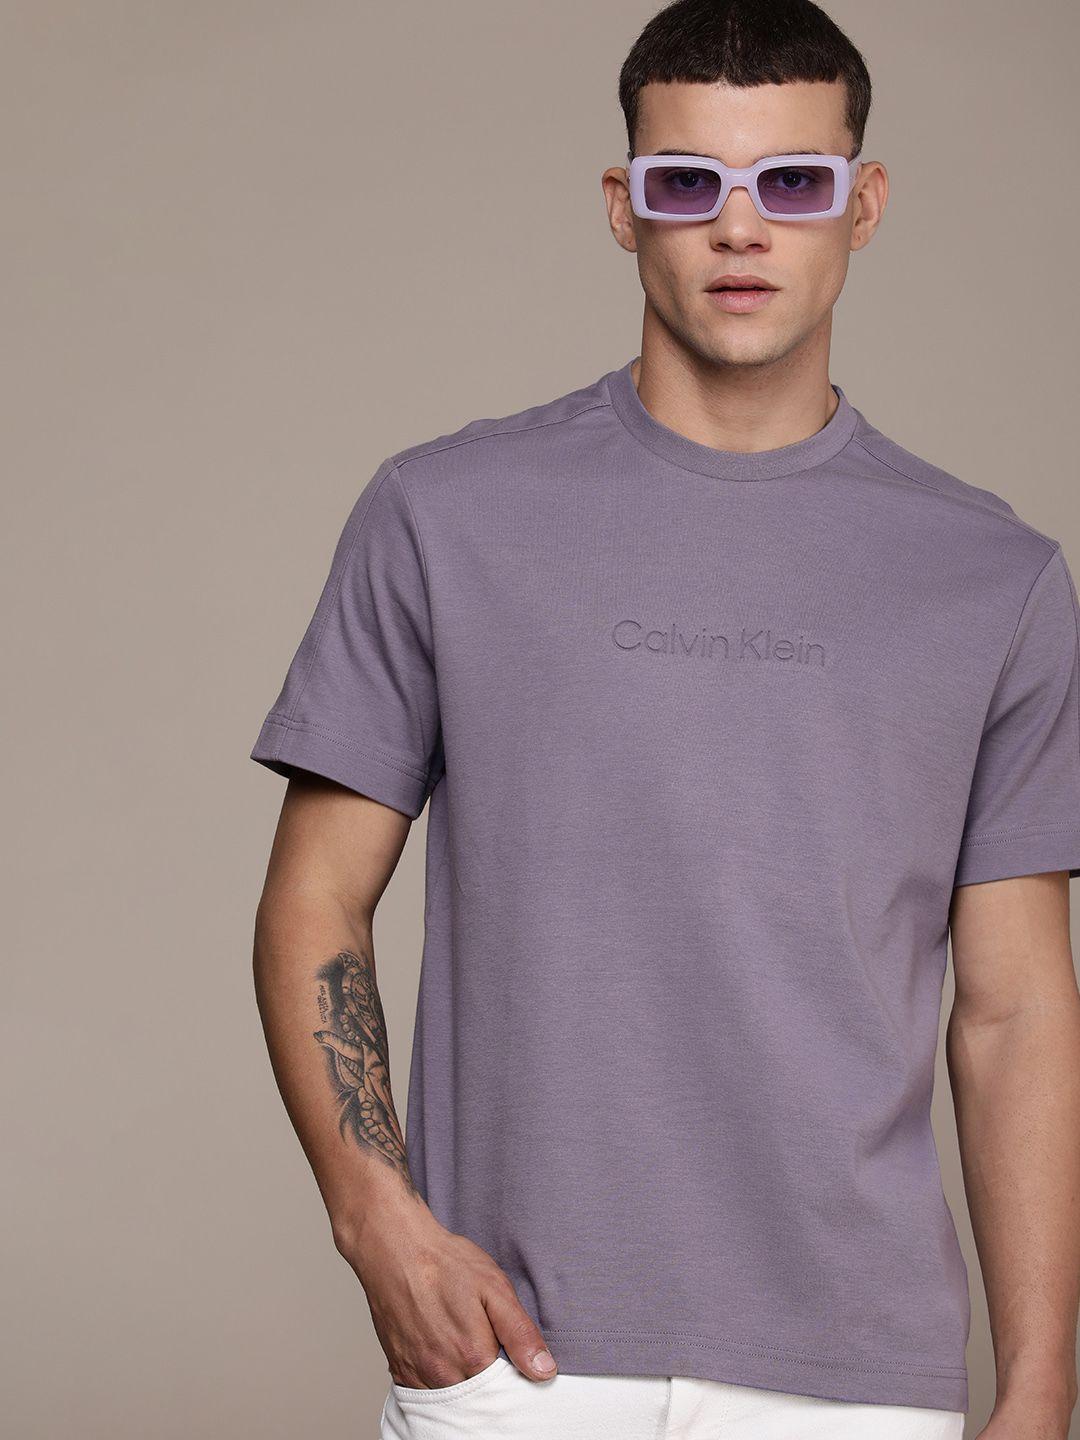 calvin klein jeans relaxed fit brand logo debossed detail pure cotton t-shirt